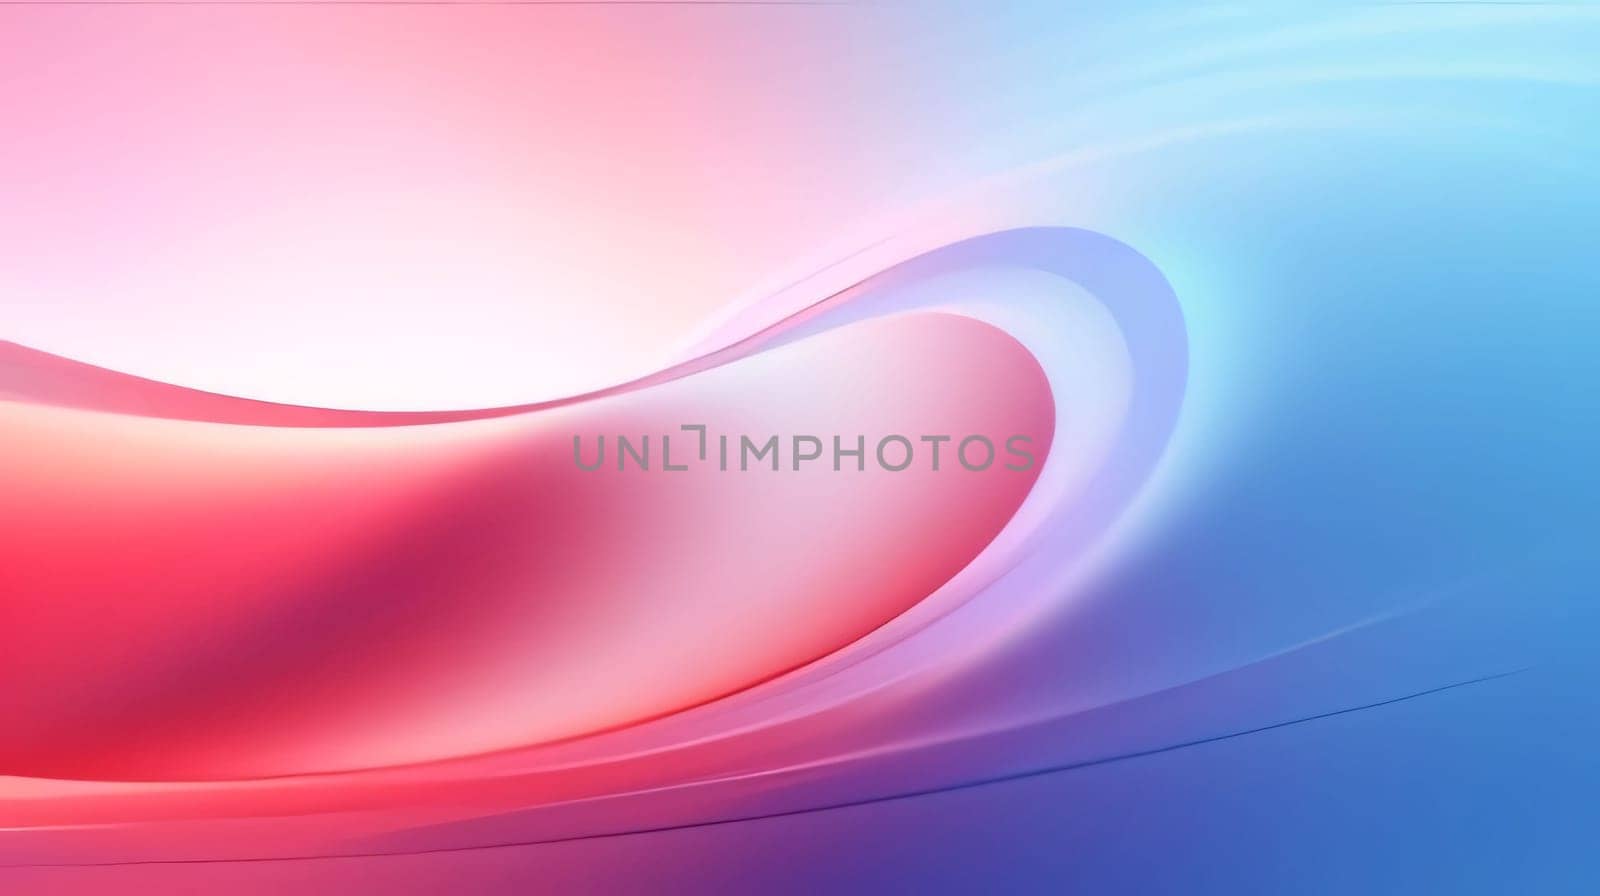 Abstract background design: abstract background with smooth lines in blue and pink colors for design